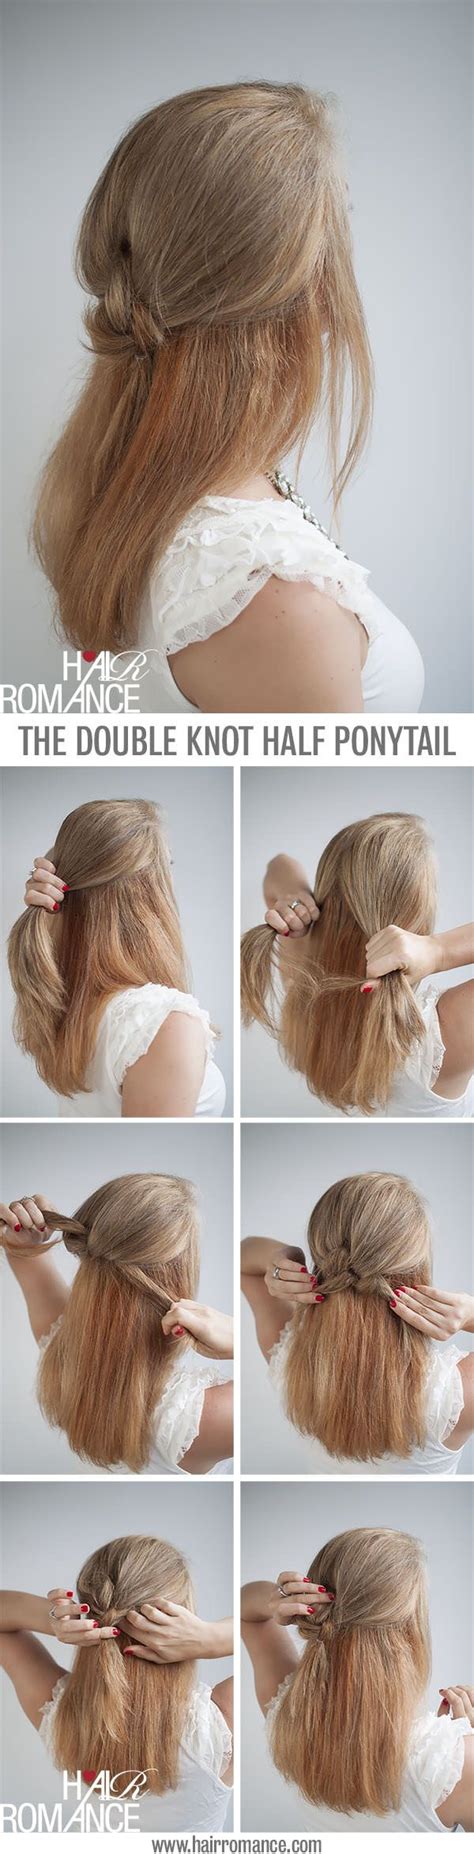 Top knot bun half down hairstyle. 7 Half Up Half Down Hairstyles: The Best Of Both Worlds ...